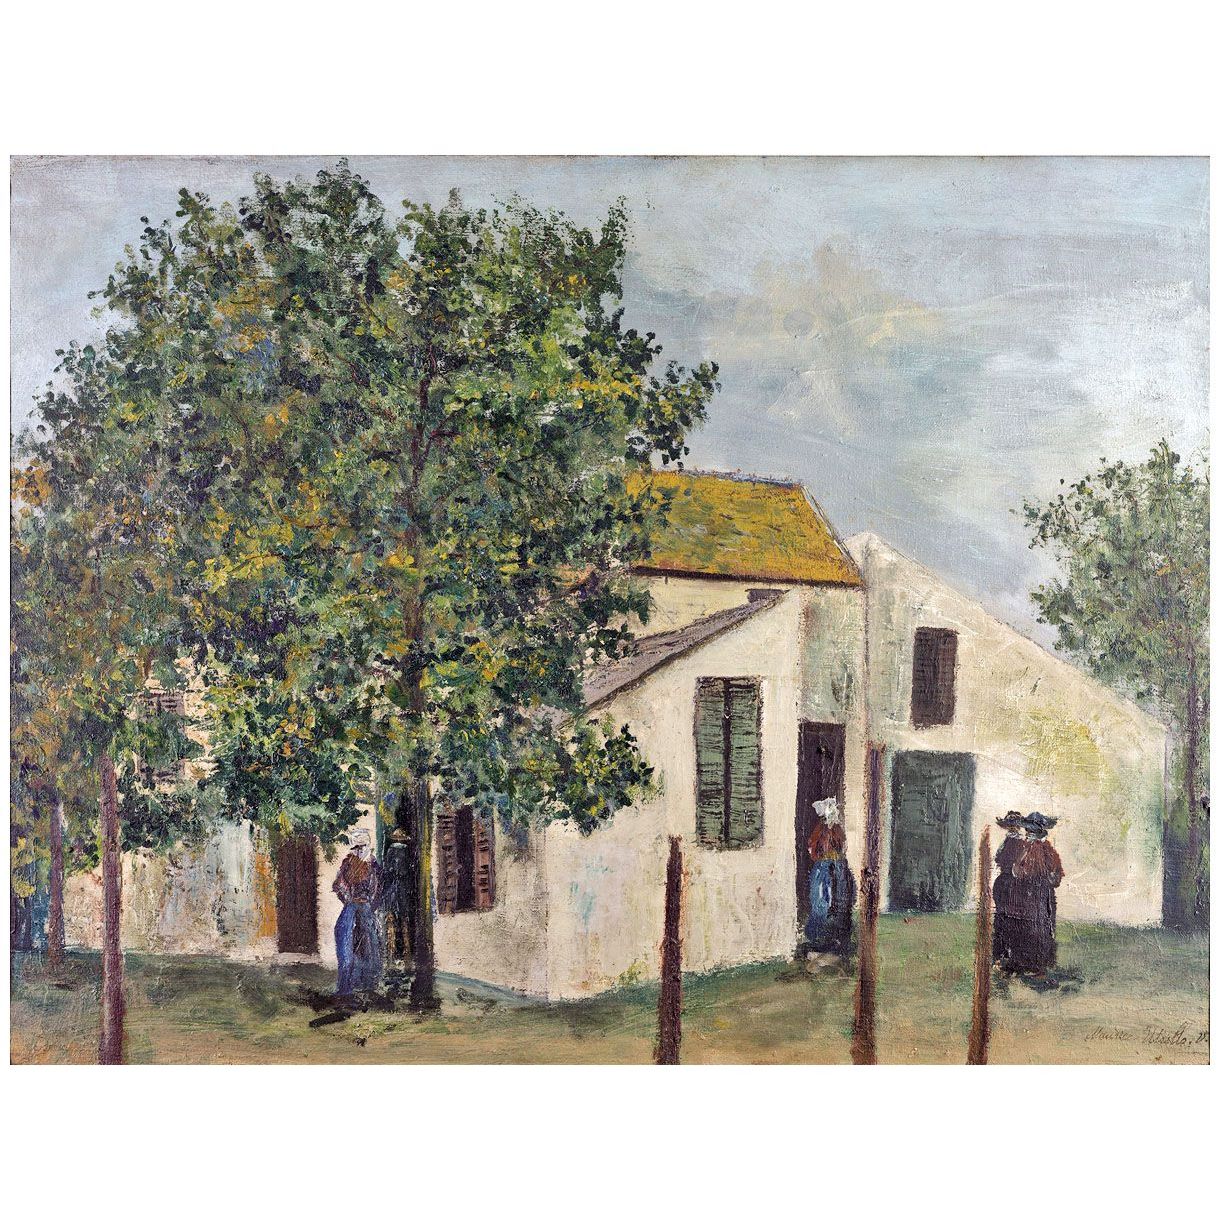 Maurice Utrillo. Le maison blanche. 1912. Pushkin Museum. Moscow